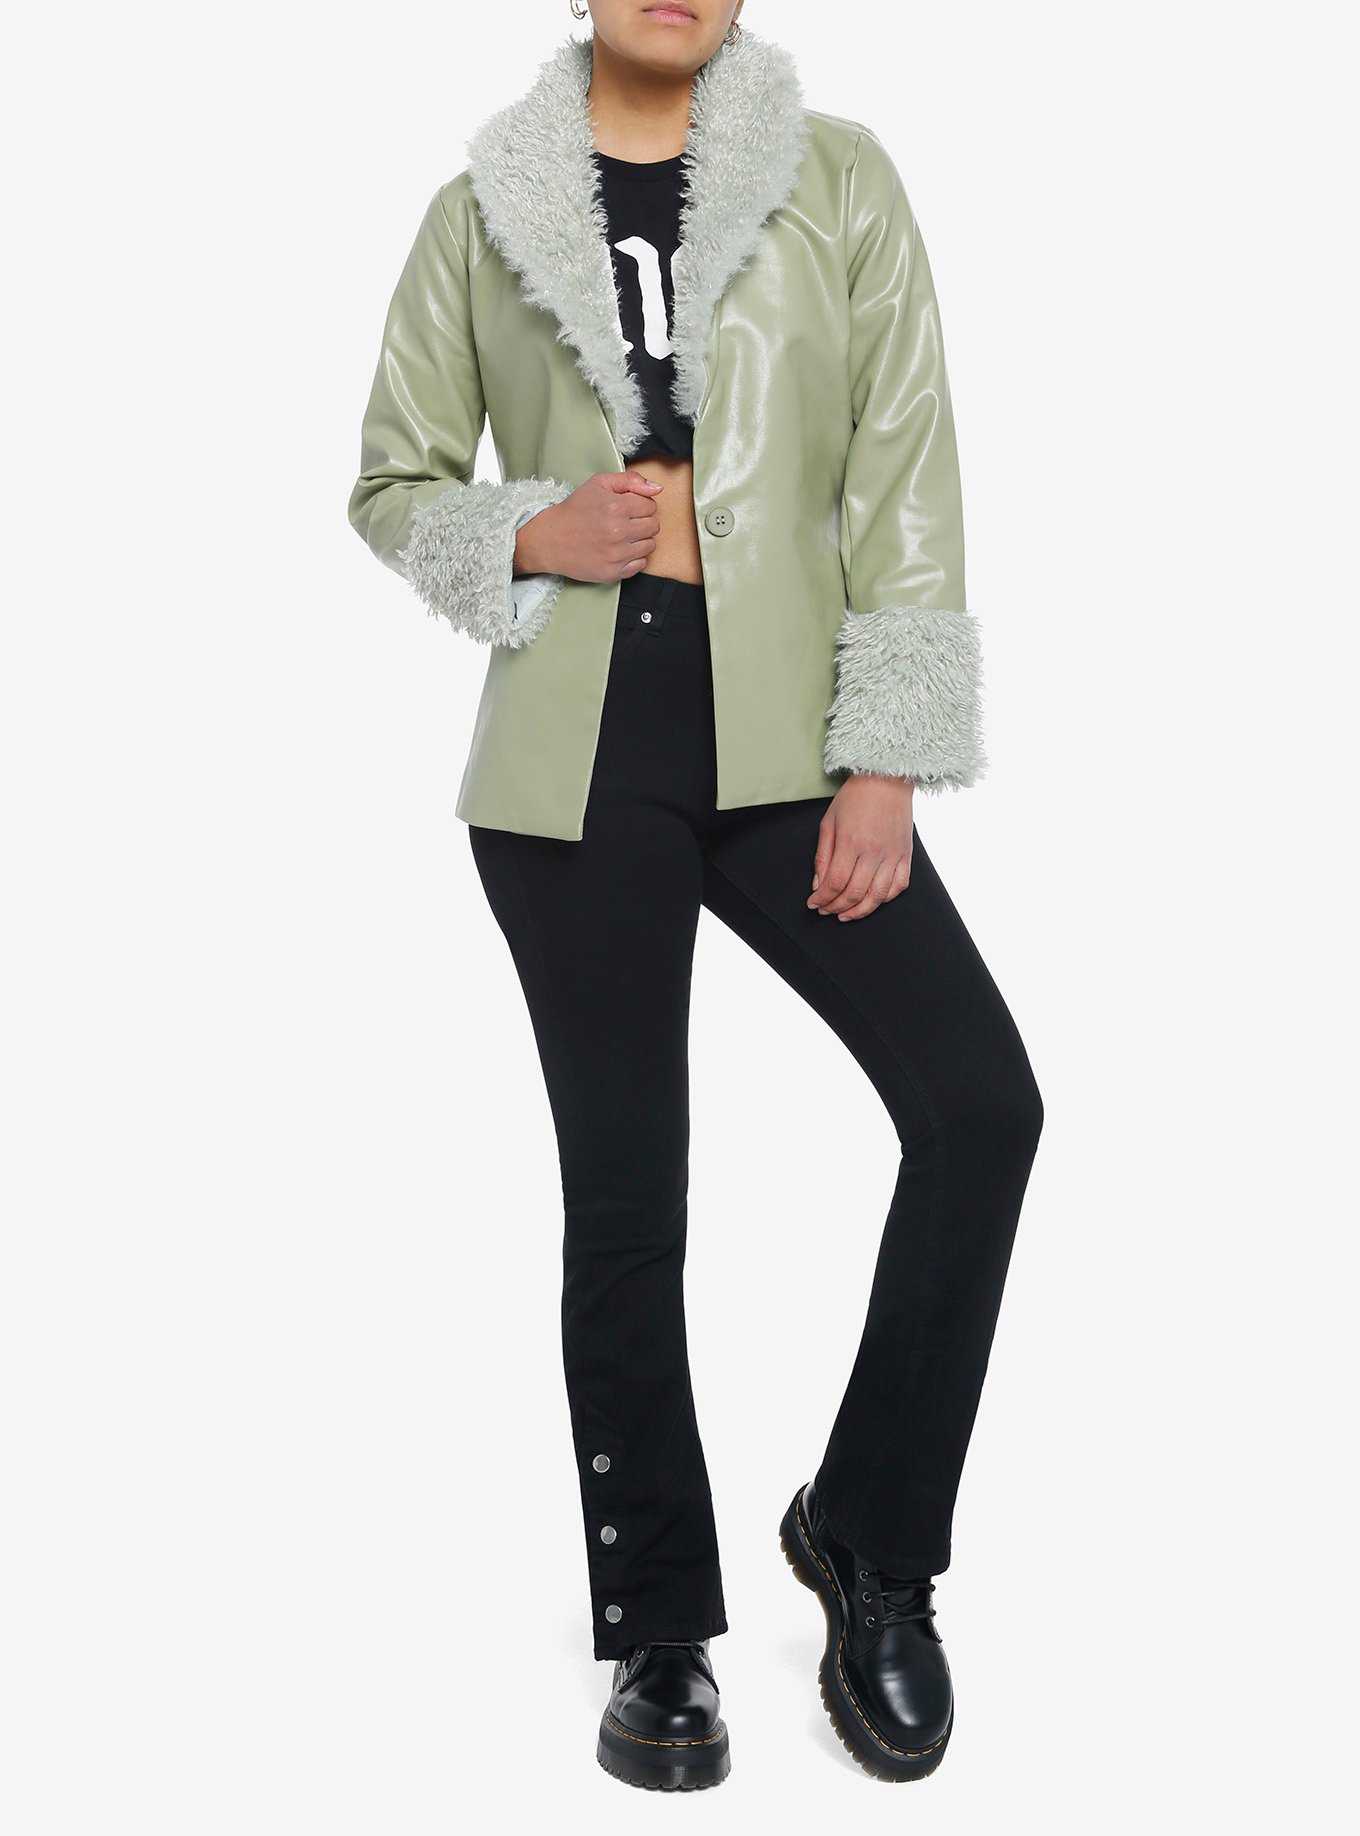 Green Fuzzy Trim Girls Faux Leather Jacket, , hi-res